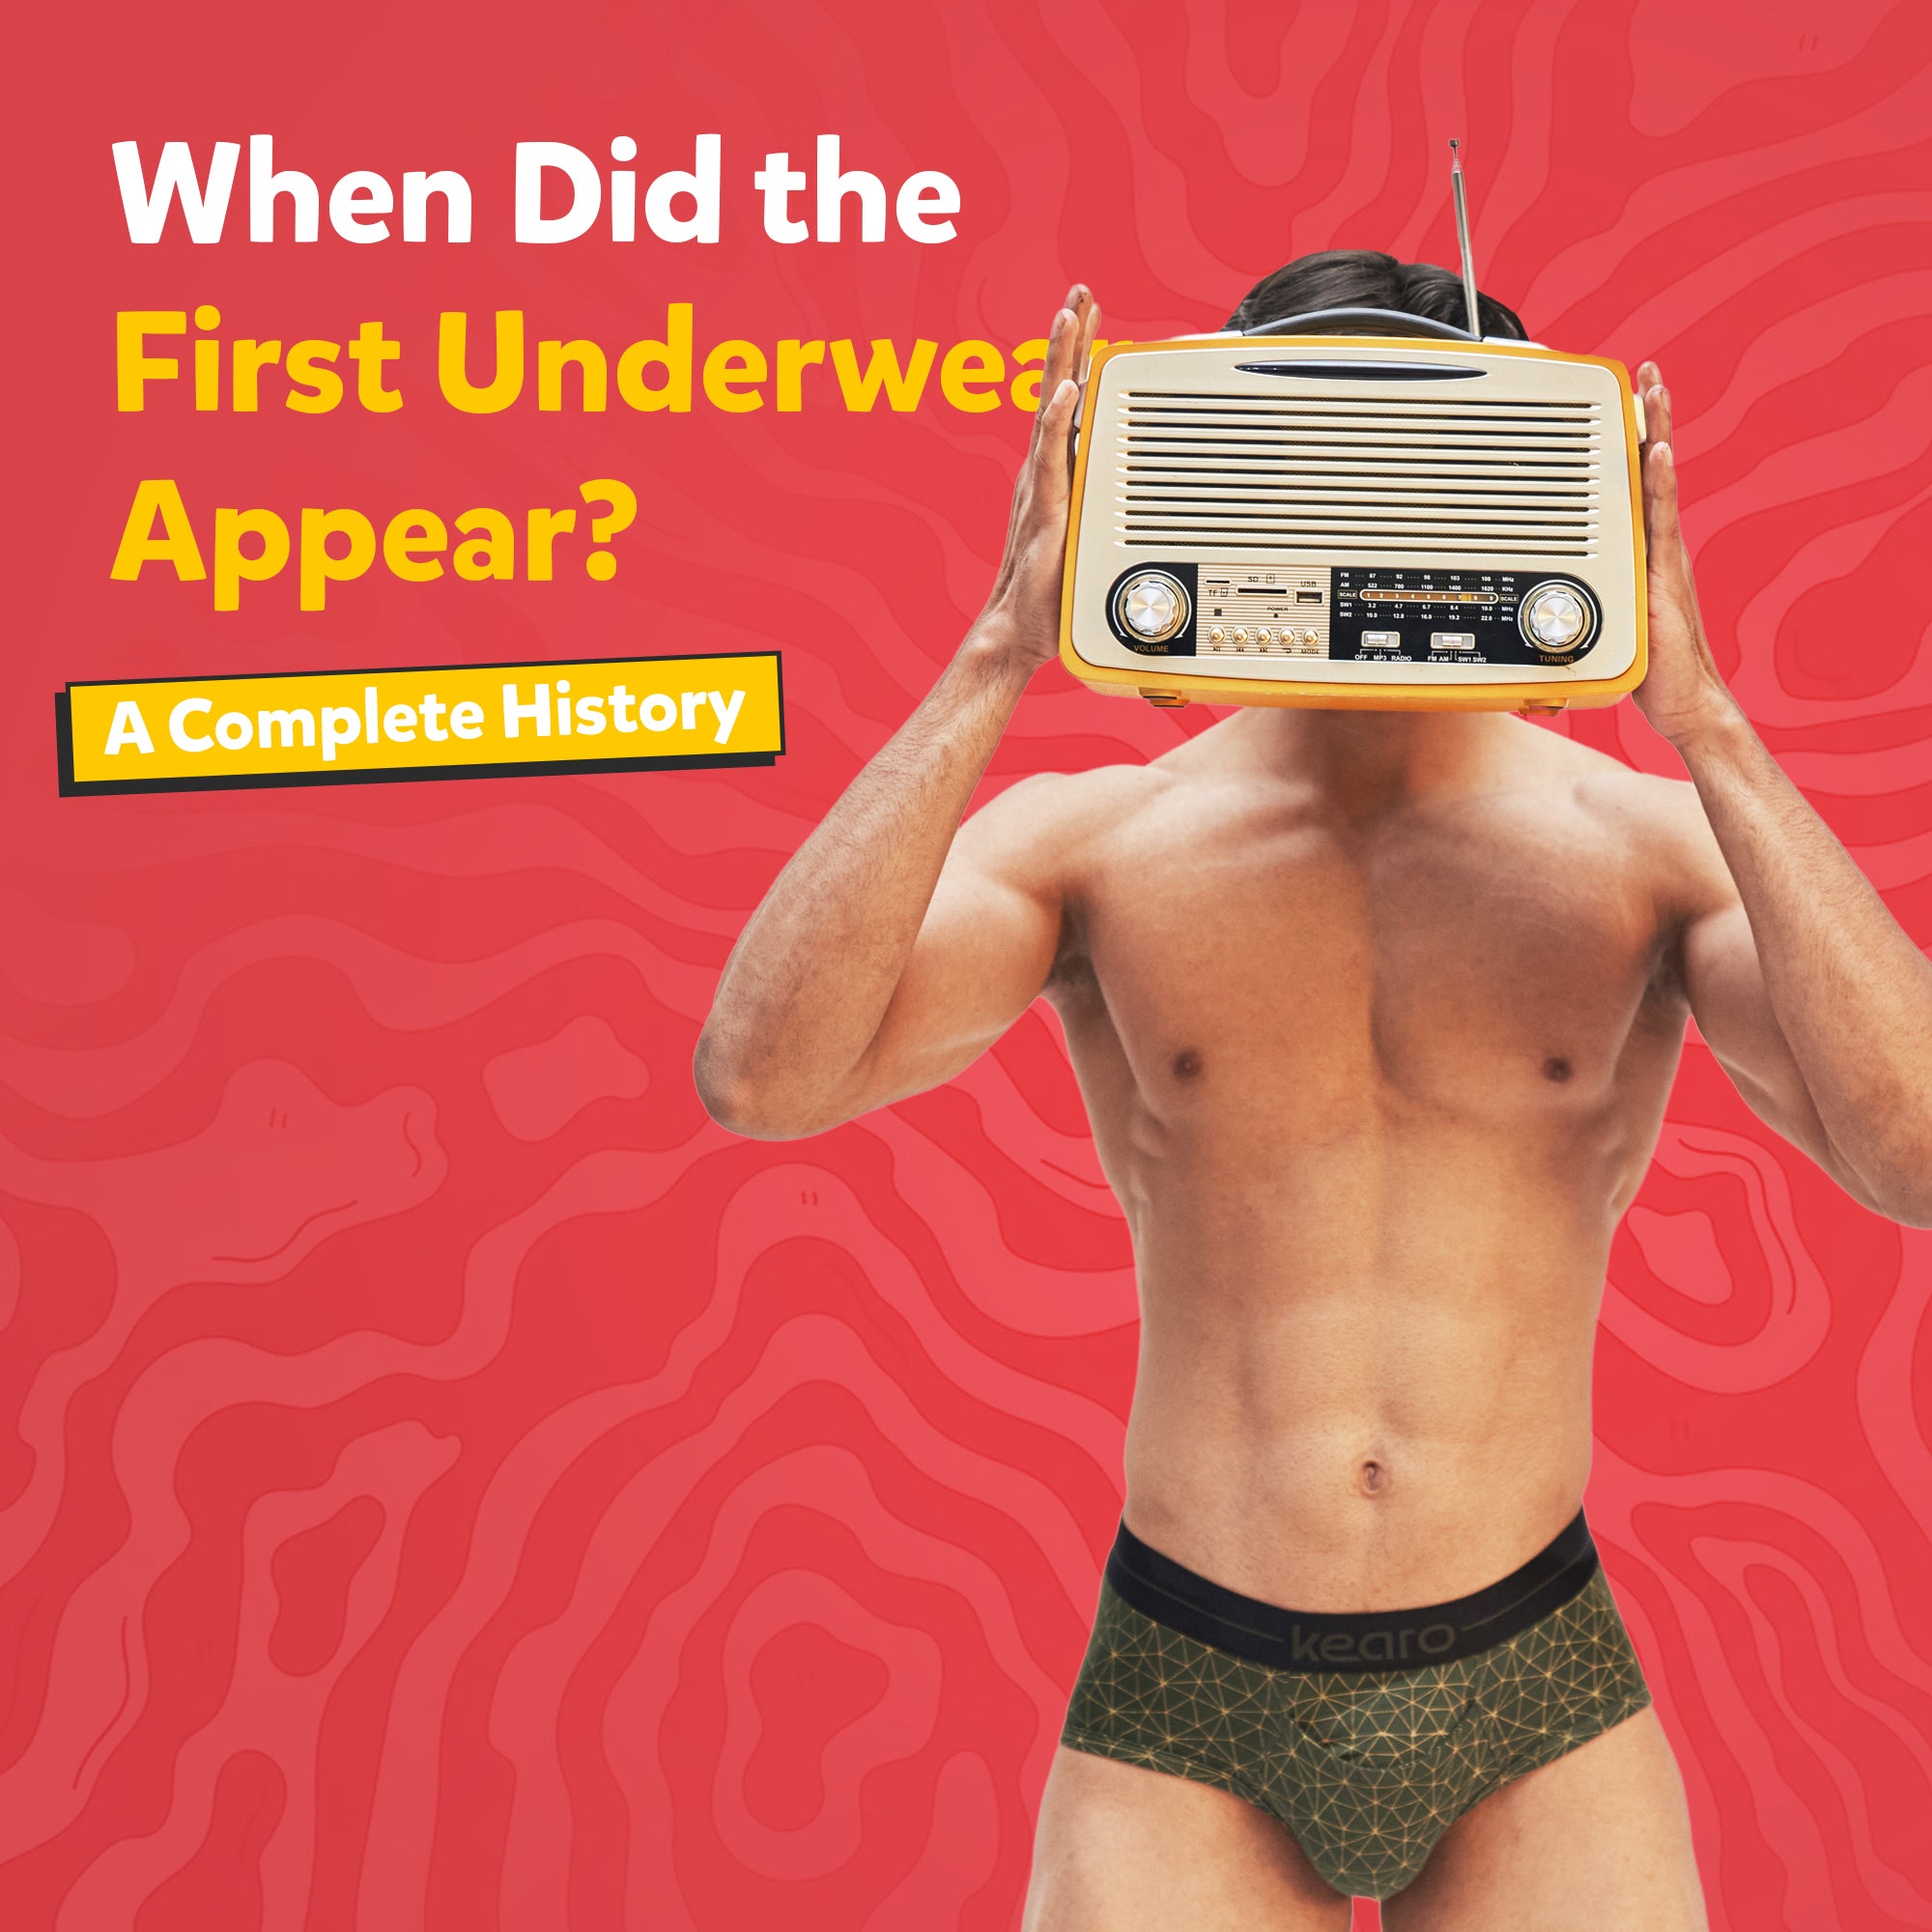 When Did the First Underwear Appear? A Complete History